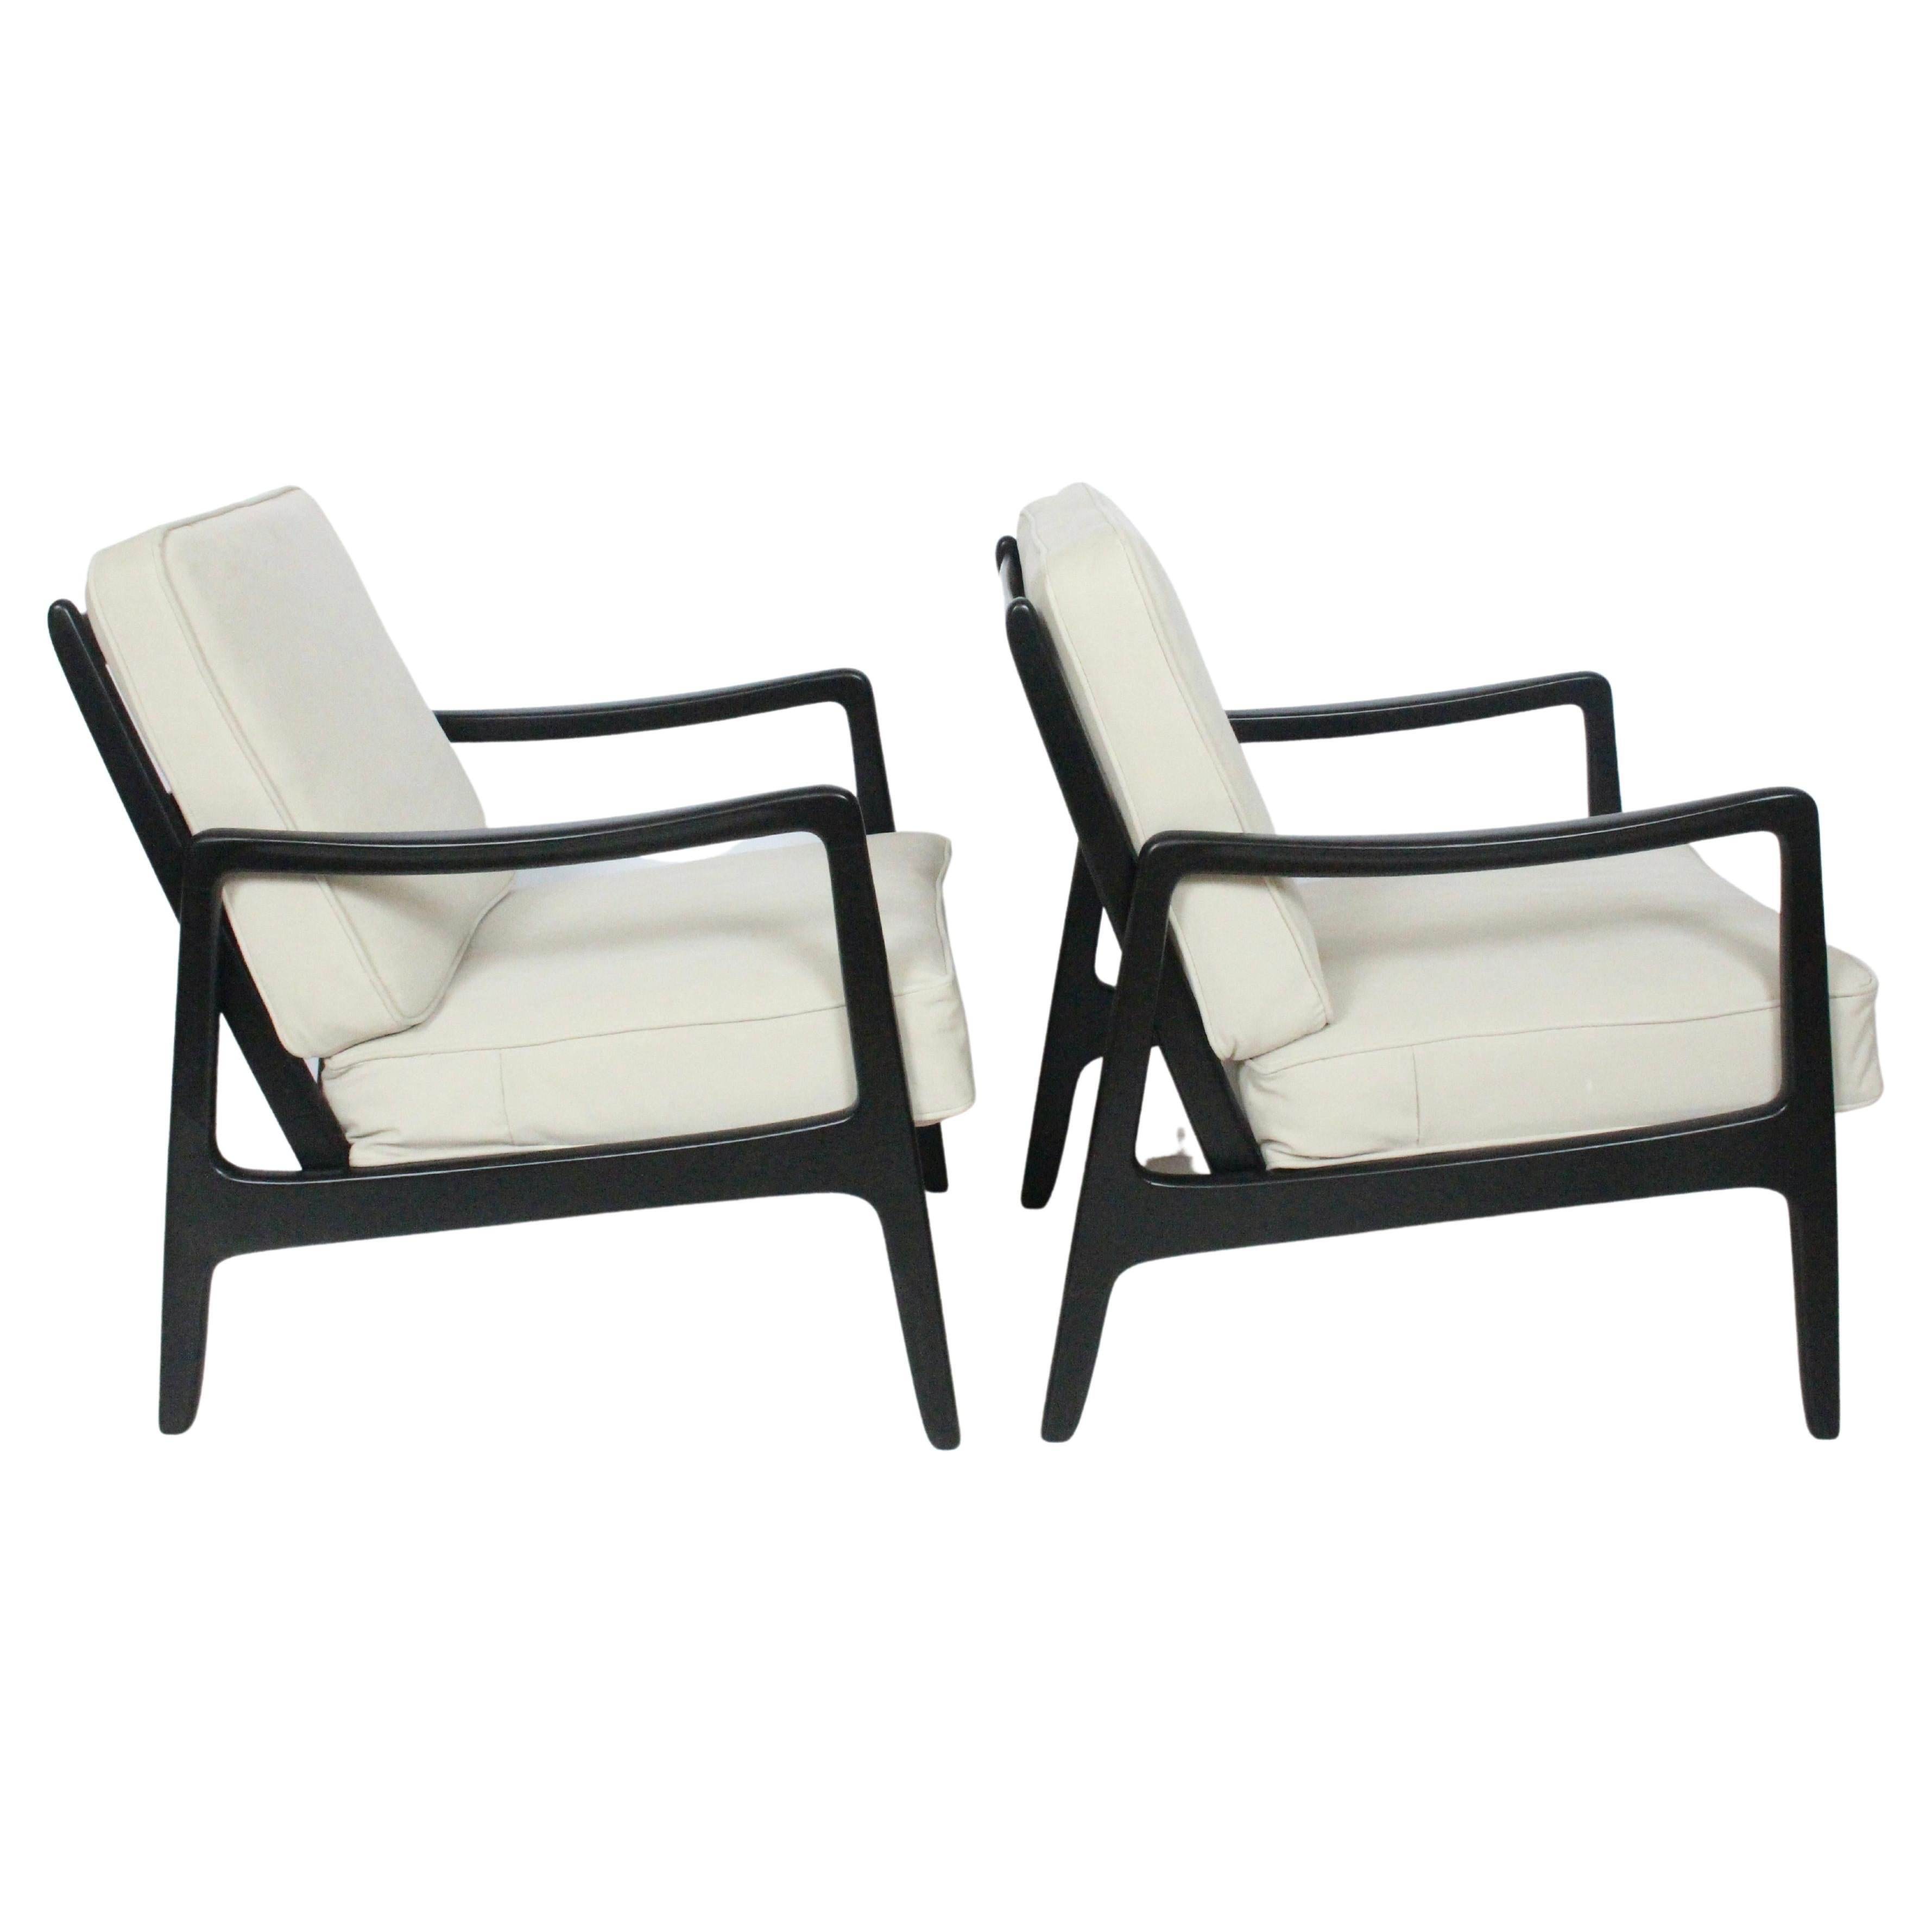 Danish Modern pair of solid ebonized Cuban Mahogany lounge armchairs by Ole Wanscher designed for France and Daverkosen distributed by John Stuart. Featuring solid, sturdy newly ebonized mahogany and angled ladder back style framework for ultimate